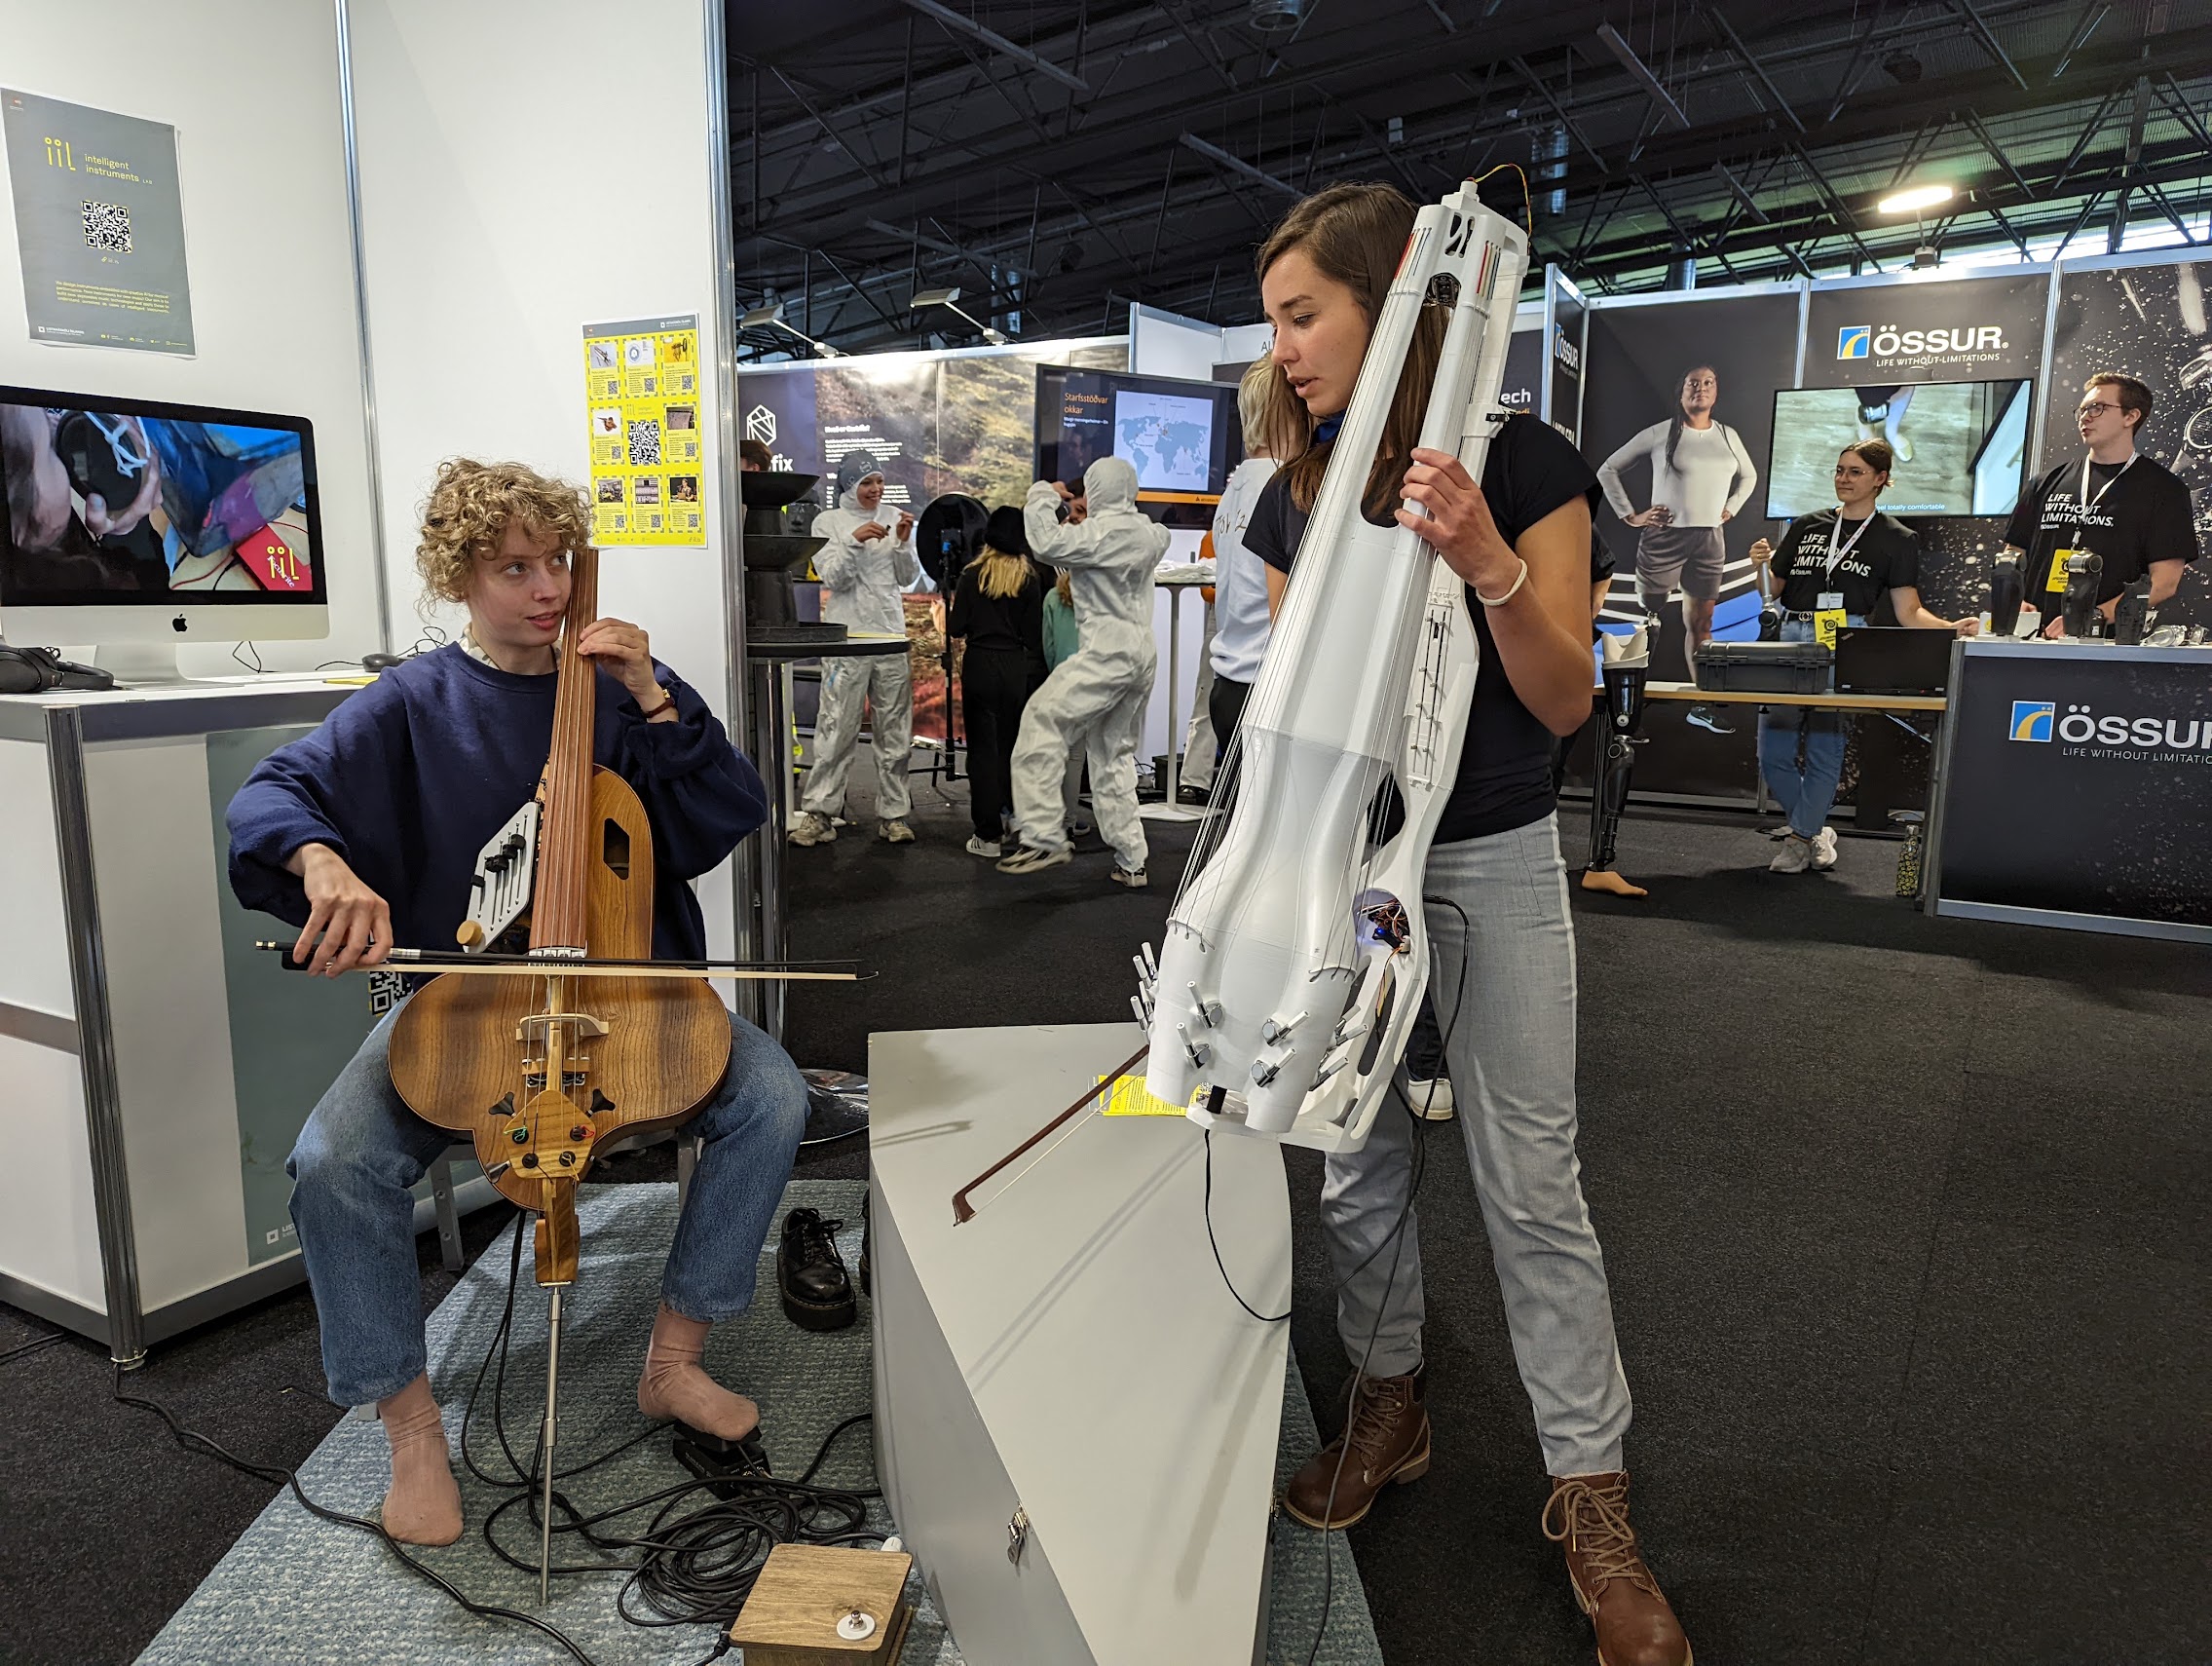 Two young women, each one with an upright instrument in the lap, one playing the halldorophone like a cello, the other one standing with a knurl. In the background, people working at an expo for science.